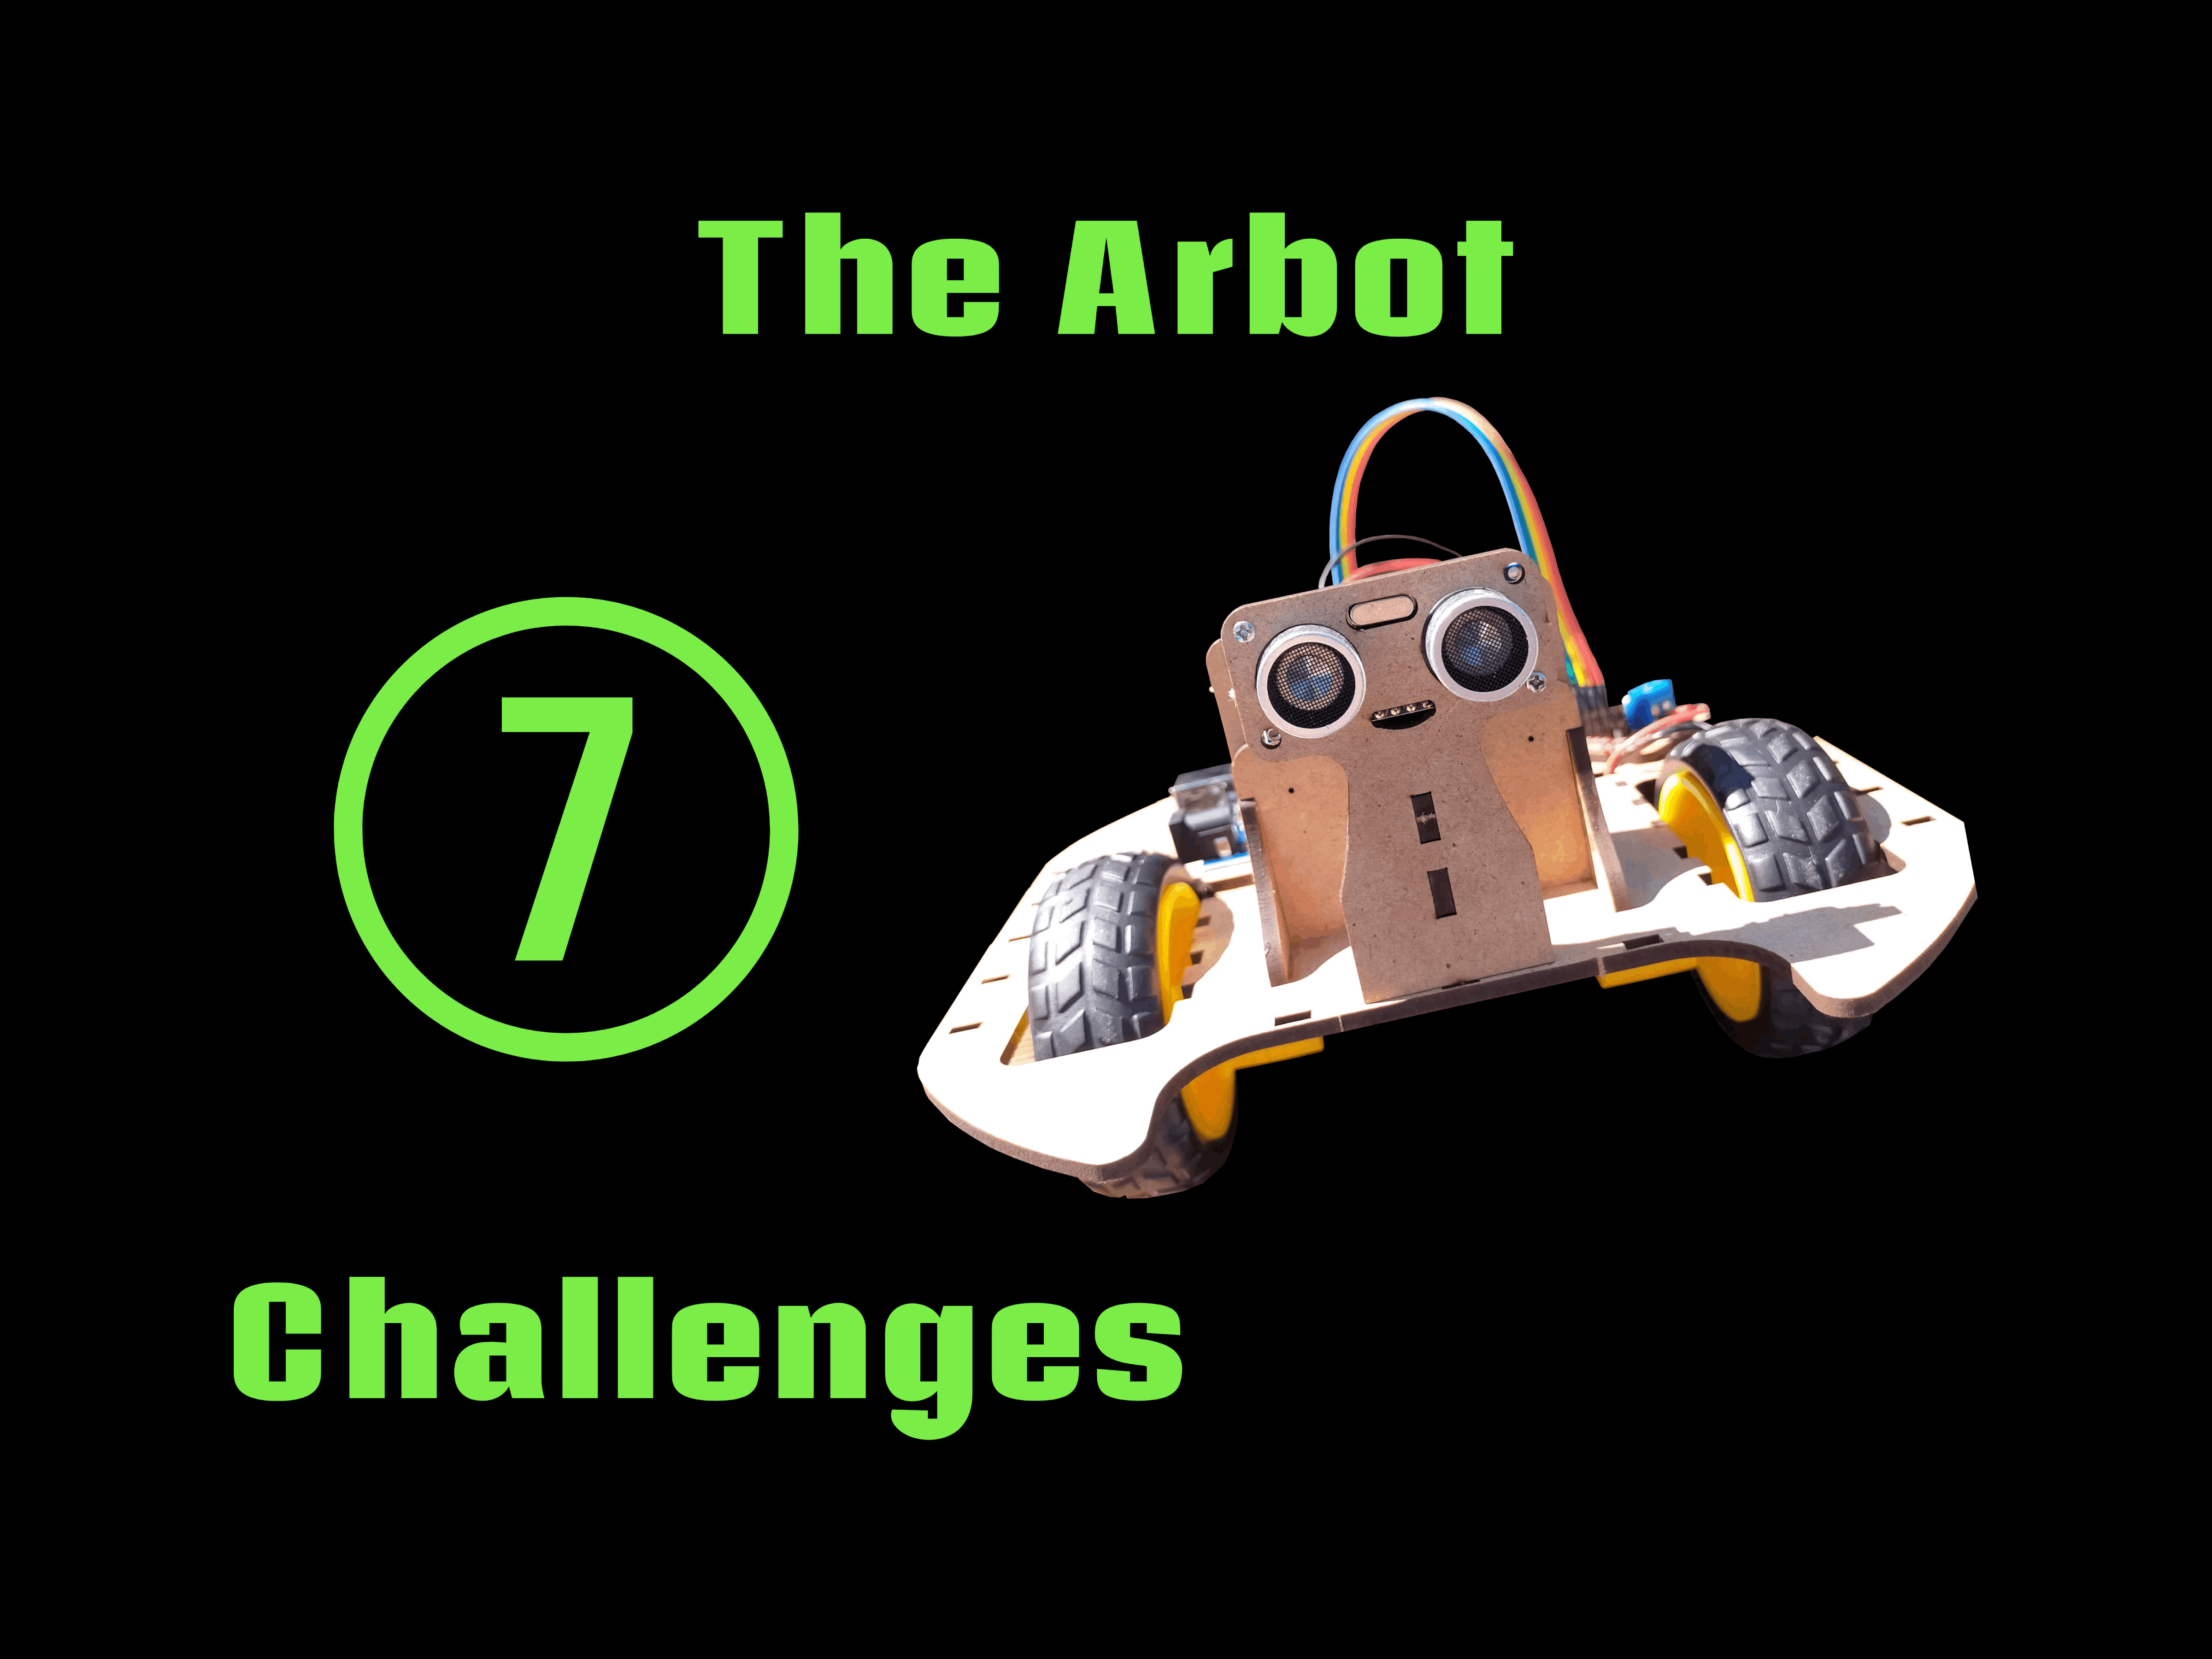 The Arbot - 7 Challenges Demo Video